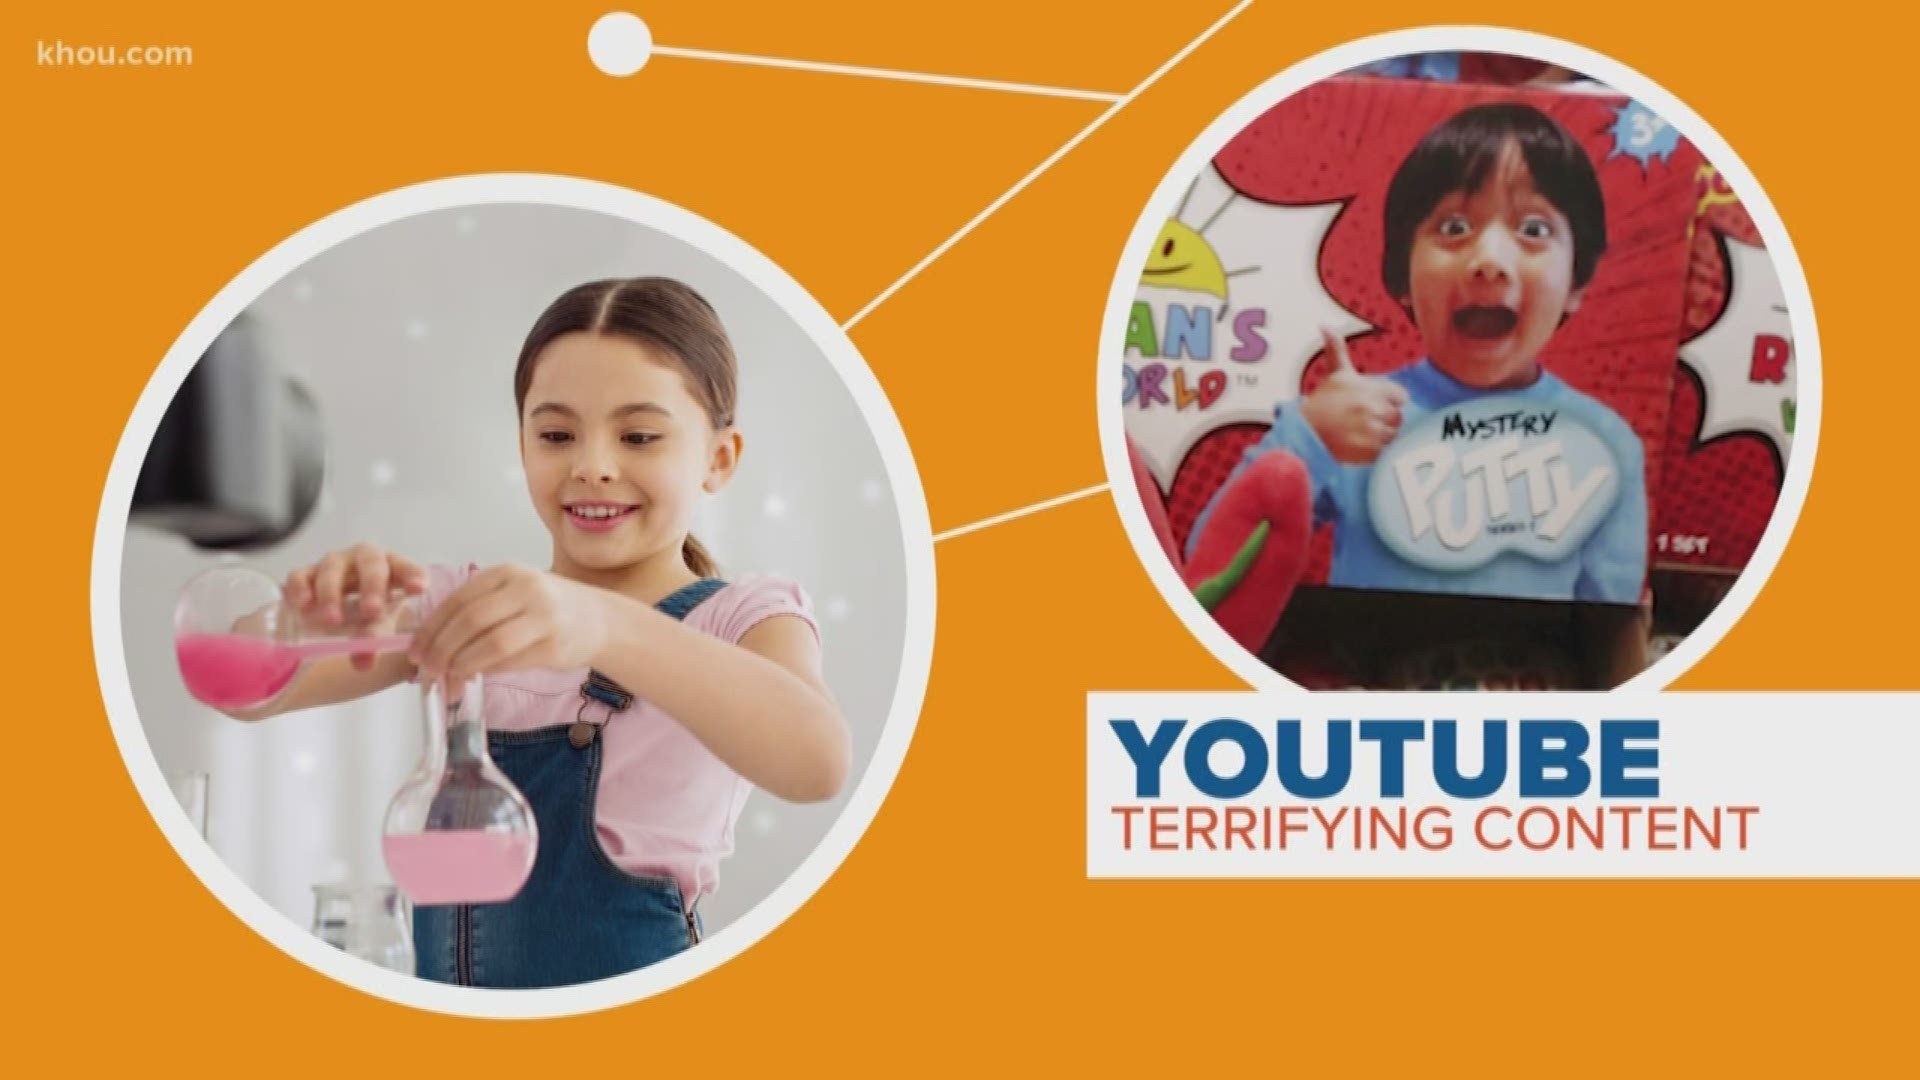 A big warning for parents before you let your kids surf the internet. One mom found YouTube videos with a really dangerous message. Our Rekha Muddaraj connects the dots.